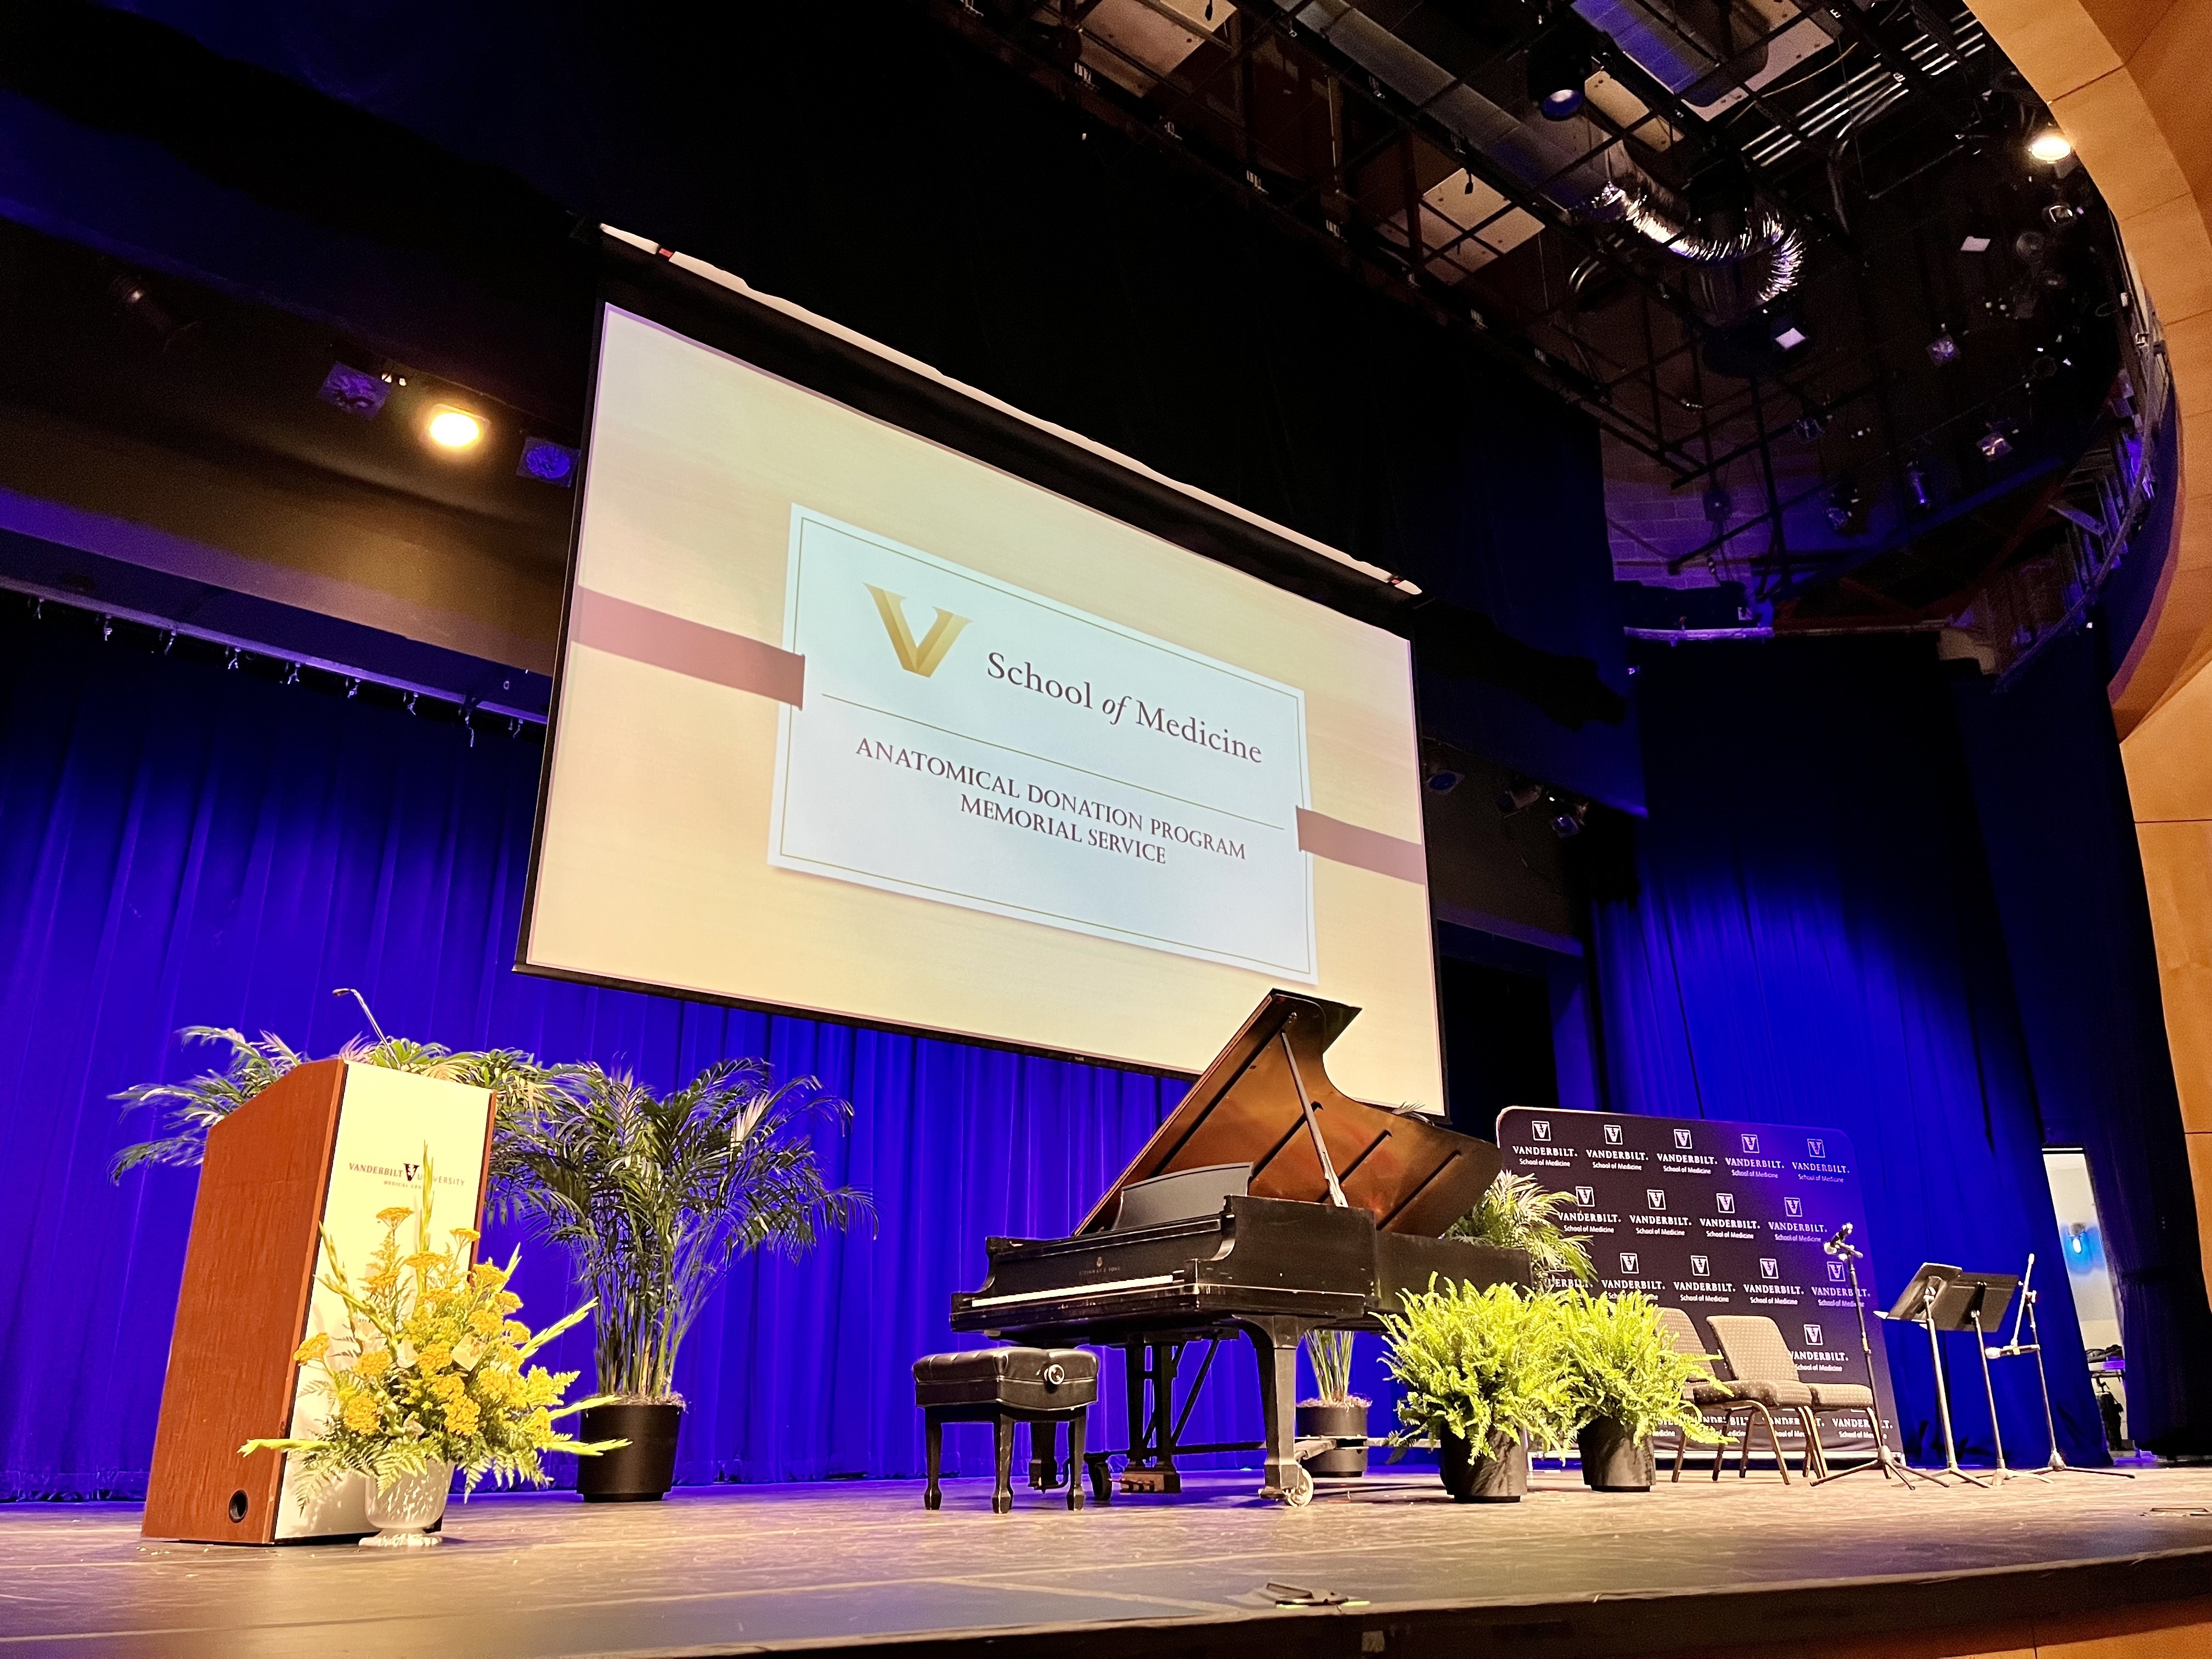 A piano sits on a stage with a lectern and chairs in front of a memorial service screen